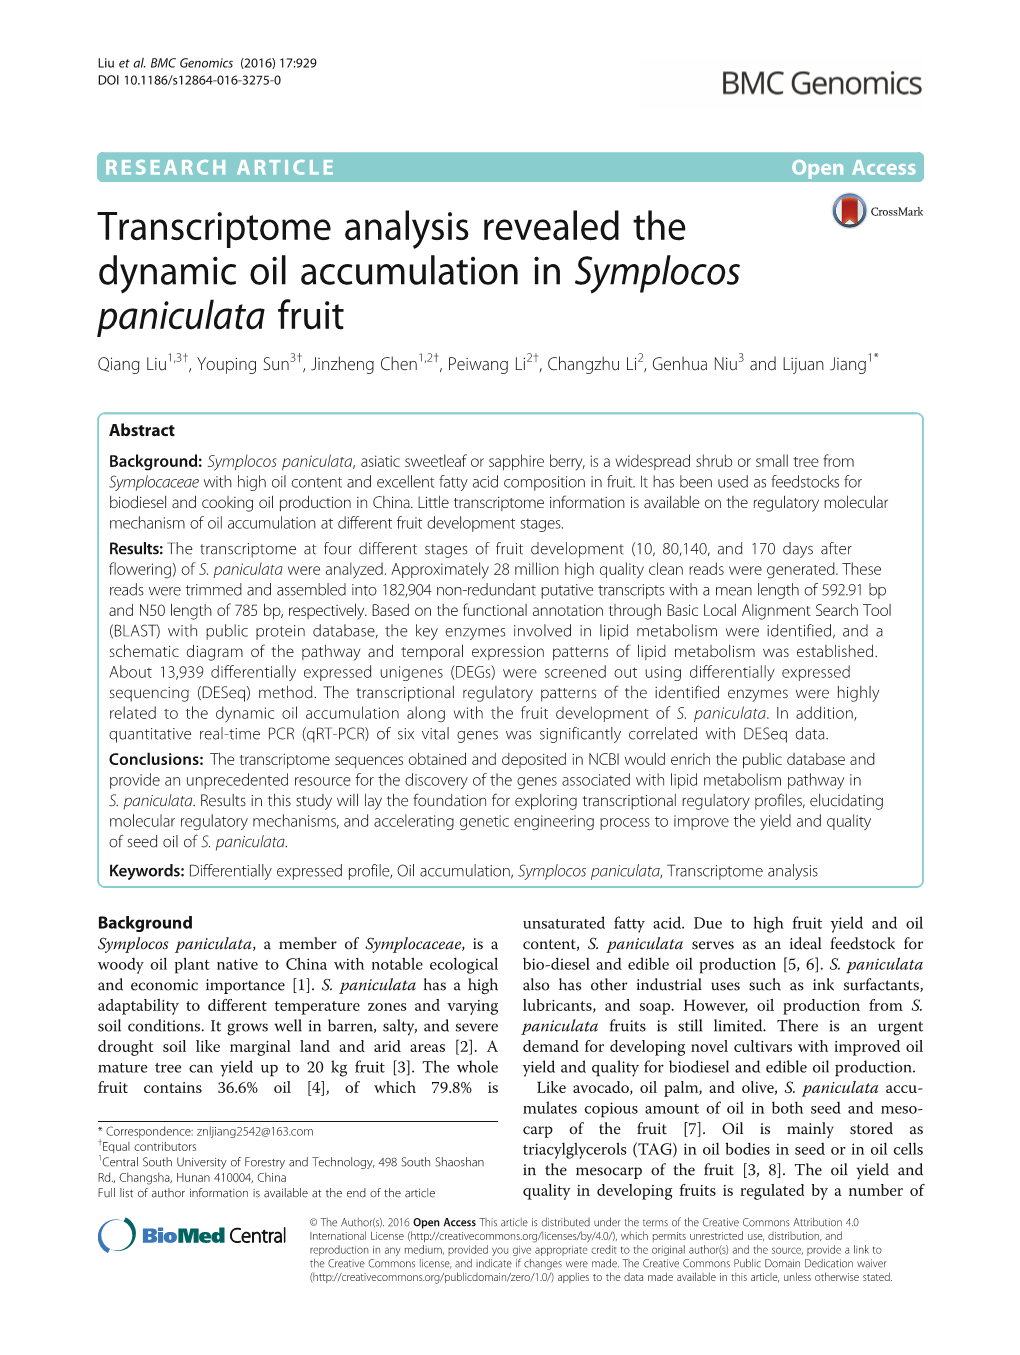 Transcriptome Analysis Revealed the Dynamic Oil Accumulation In